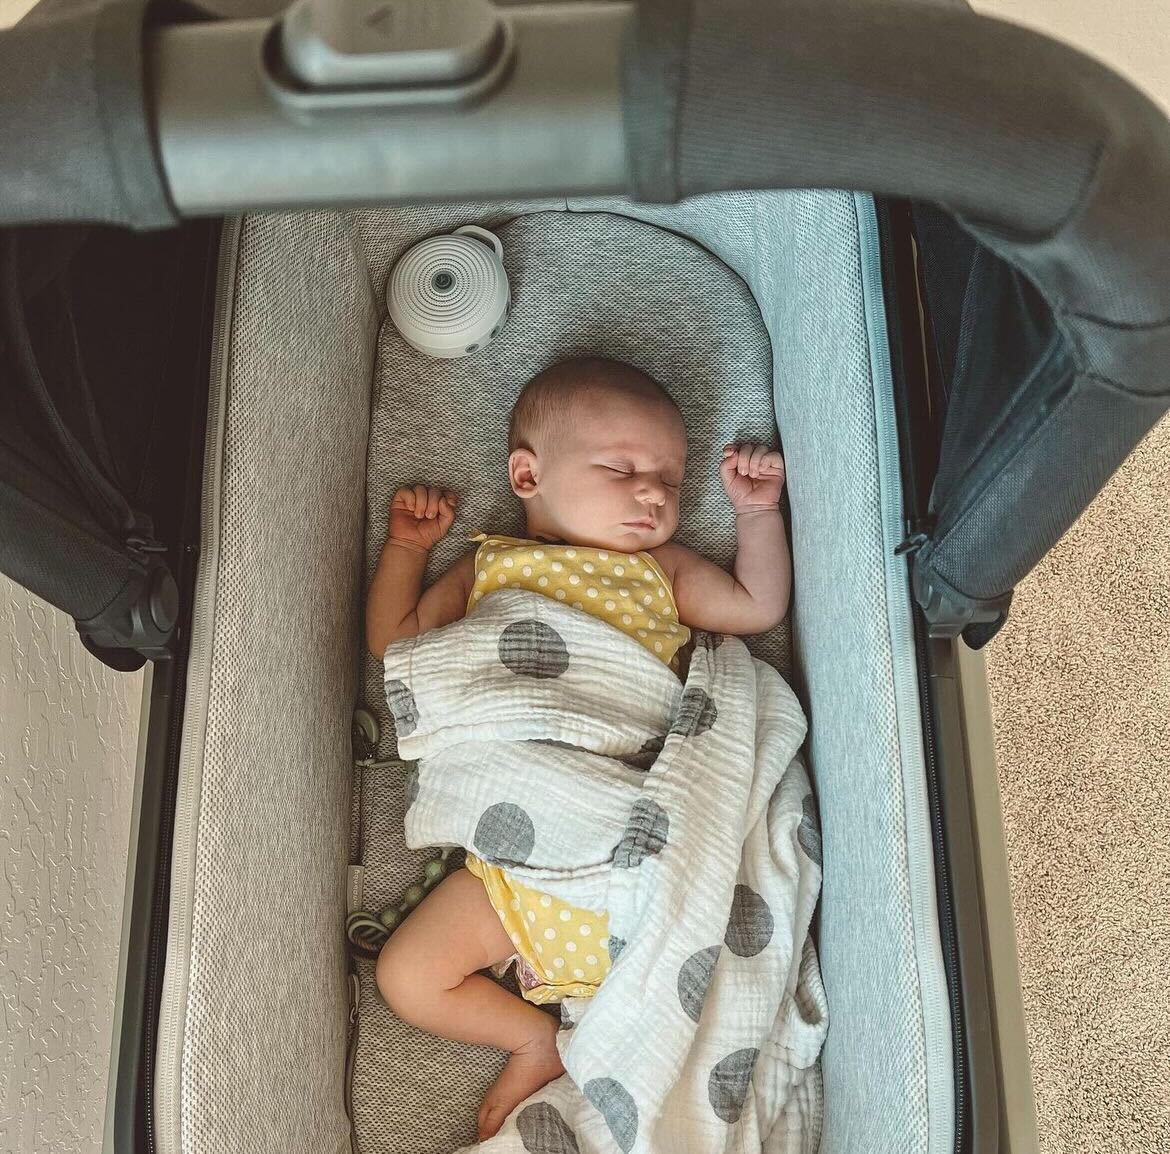 The summer of great naps is nearly here. What's your favorite part about summer sleeping? 💤                                    
#babysleep #Yogasleep #whitenoise #sleeproutine #bedtimeroutine #sleeptips #infant #kidsleep #yogasleepbaby #babysleep #infantsleep #dohm #hushh #rohm